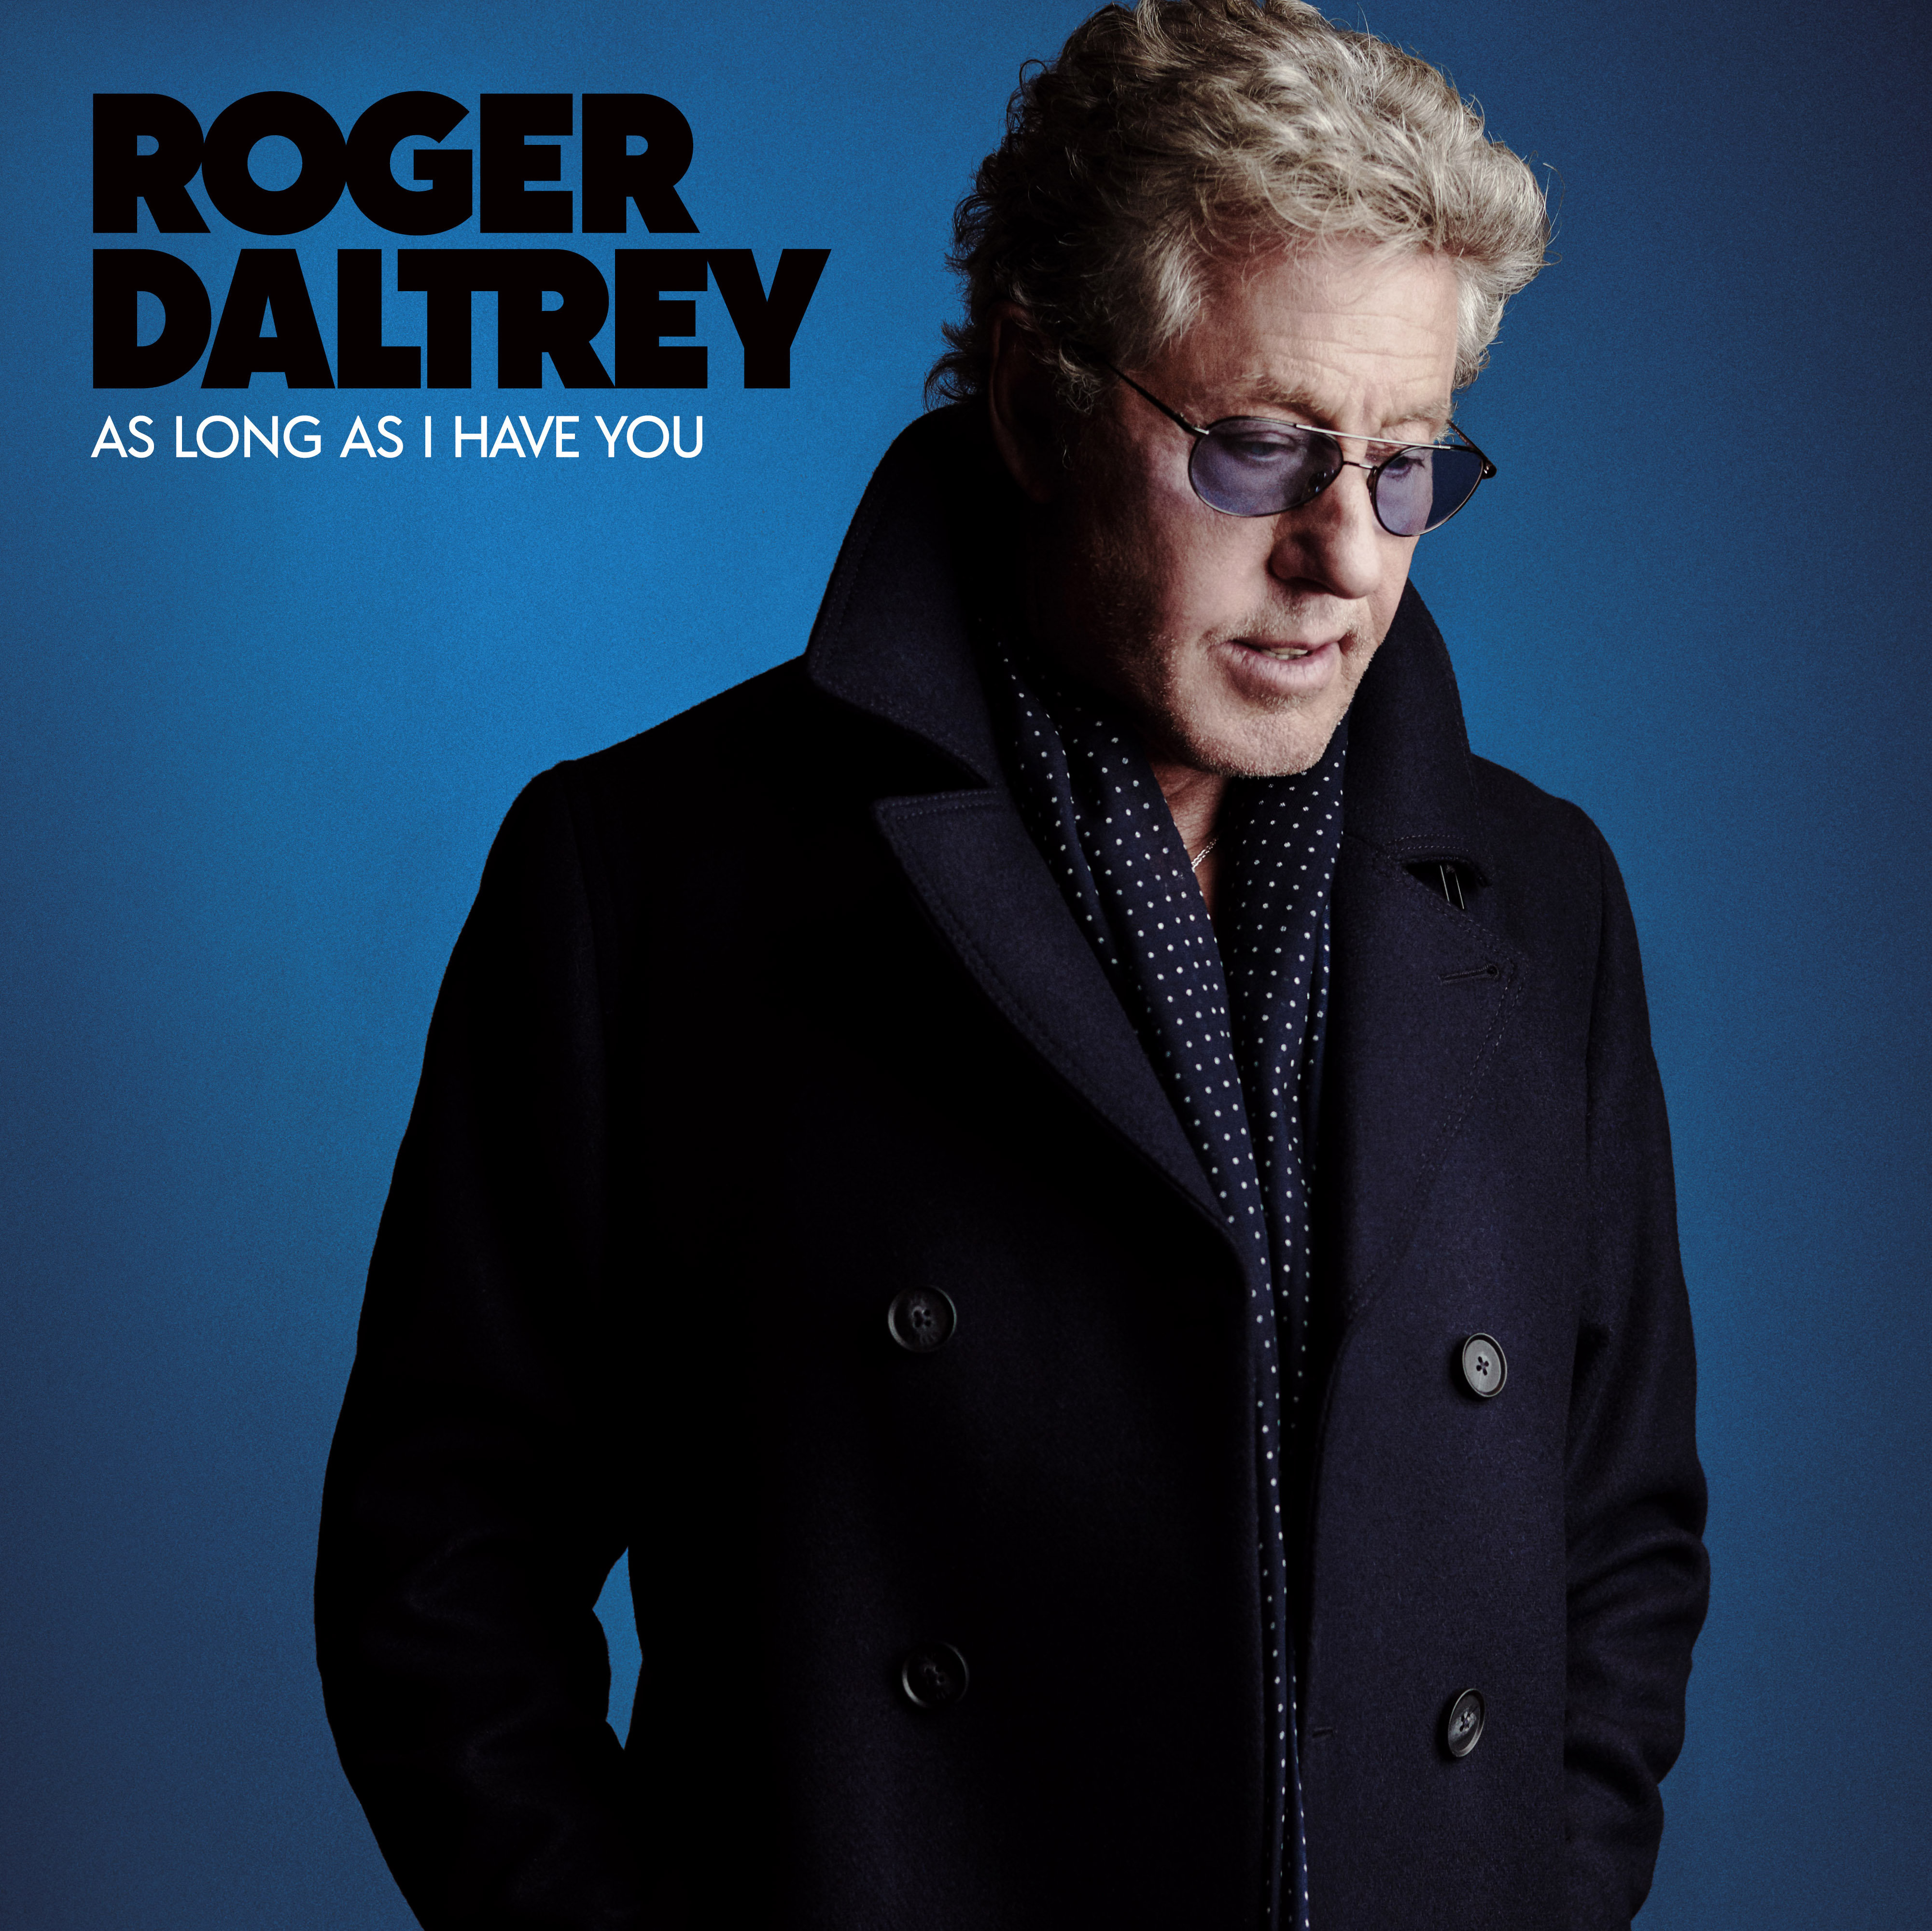 ROGER DALTREY RELEASES ‘AS LONG AS I HAVE YOU’